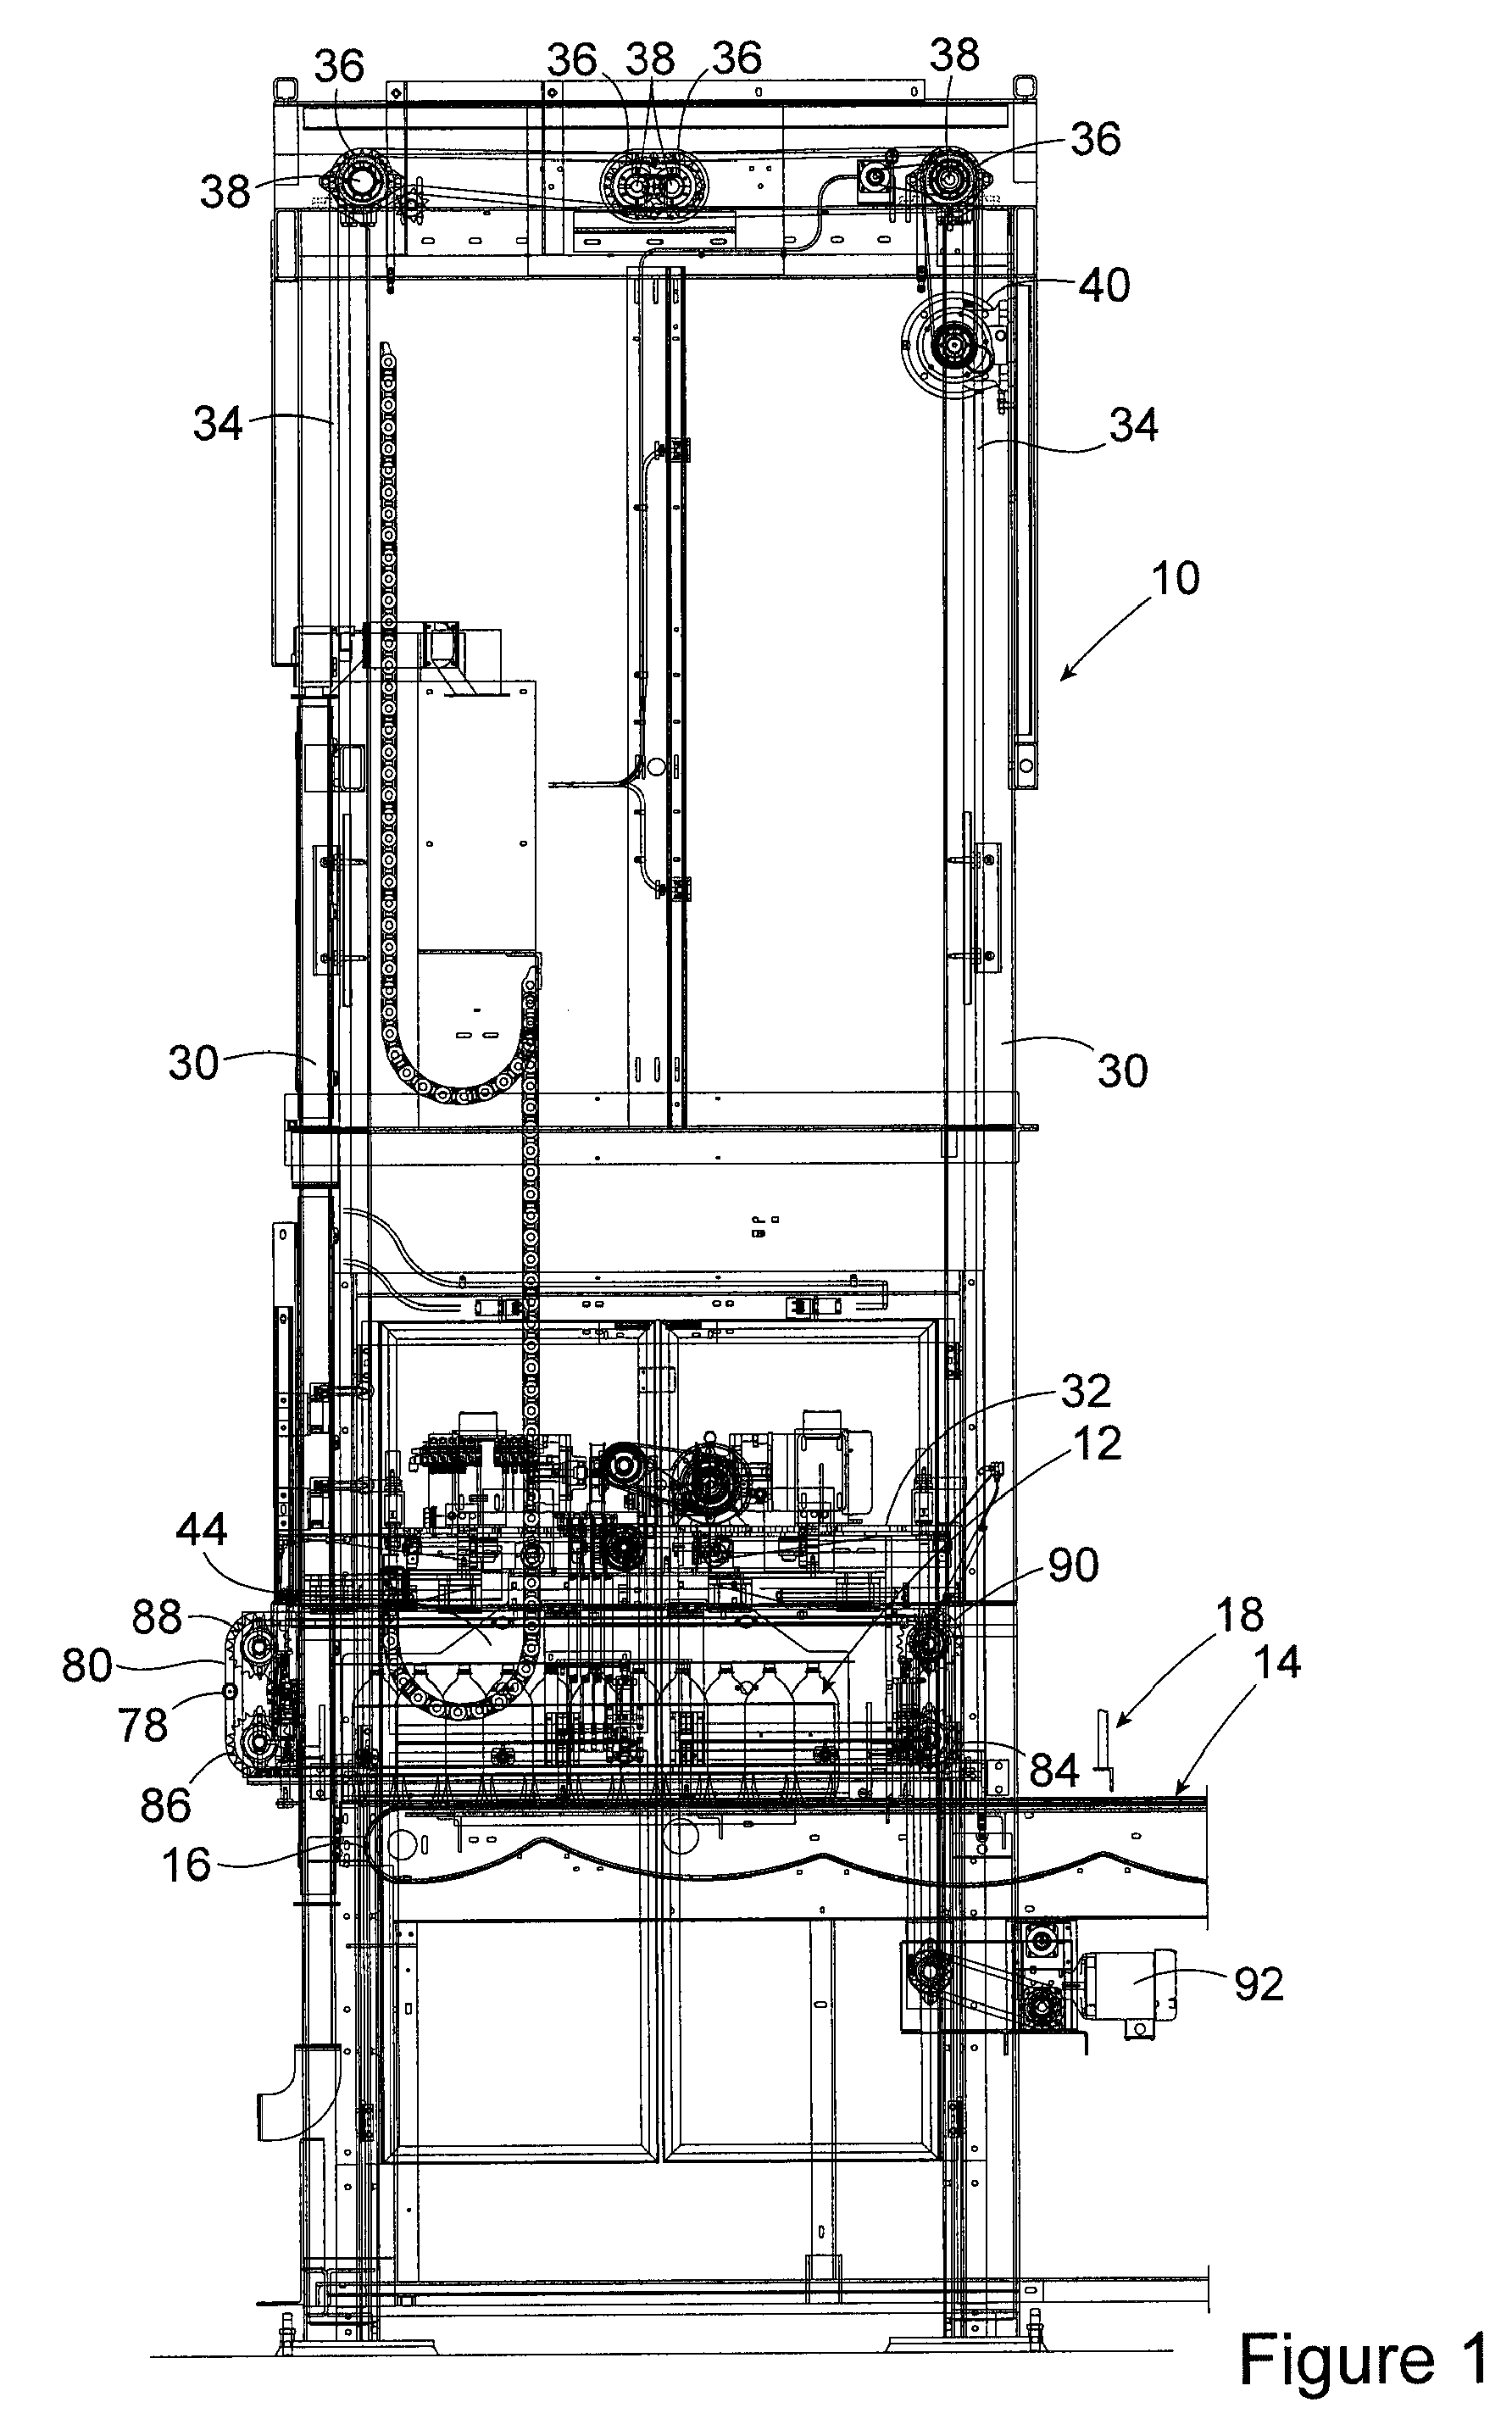 Conveyor system apparatus for stacking arrayed layers of objects